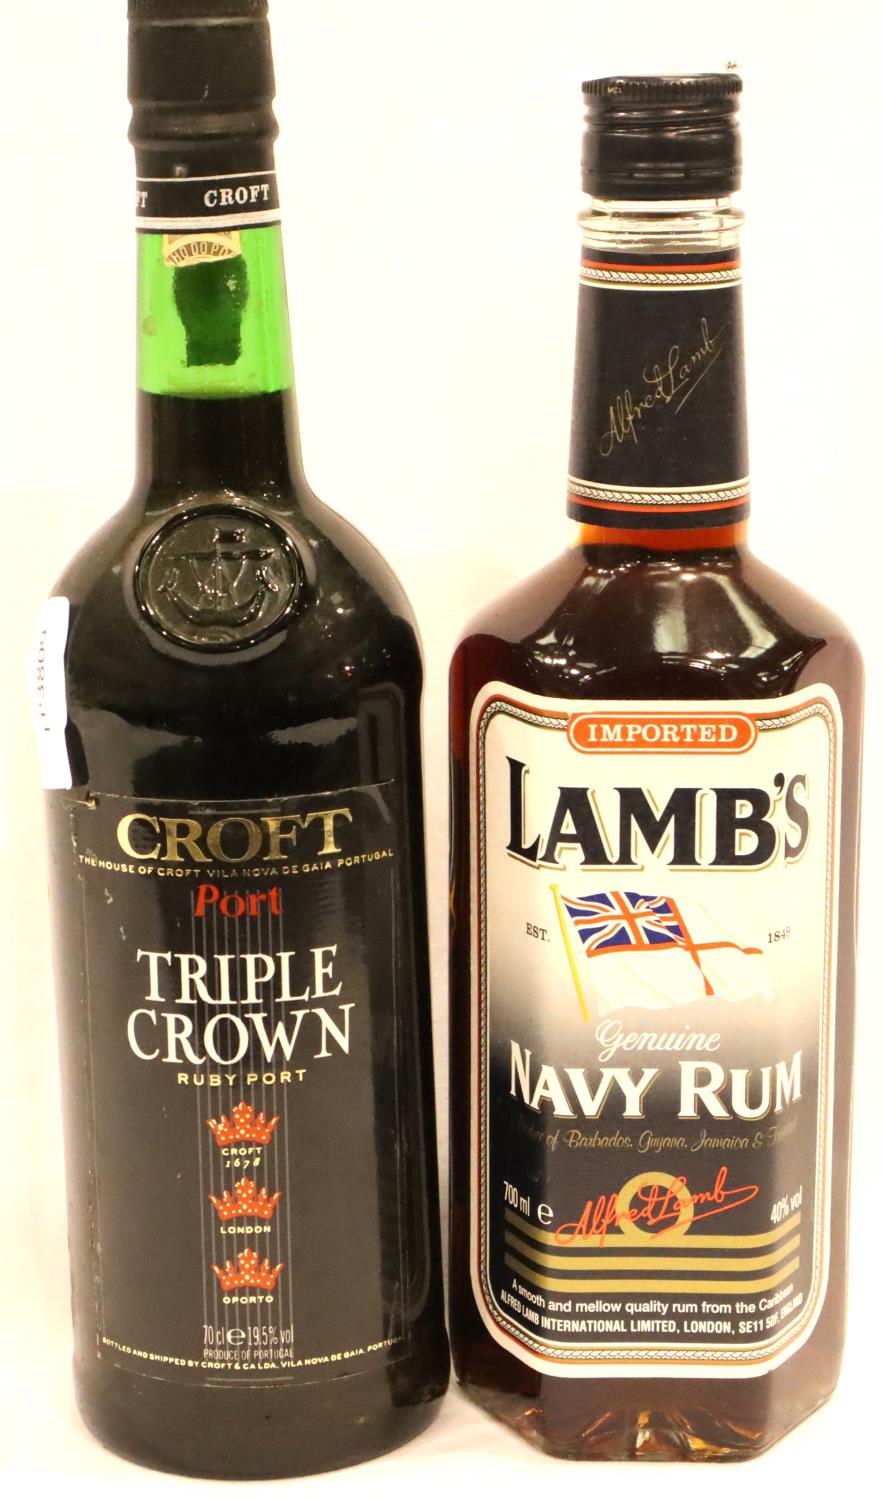 Bottle of Lambs Navy rum and a bottle of Croft triple crown port. P&P Group 2 (£18+VAT for the first